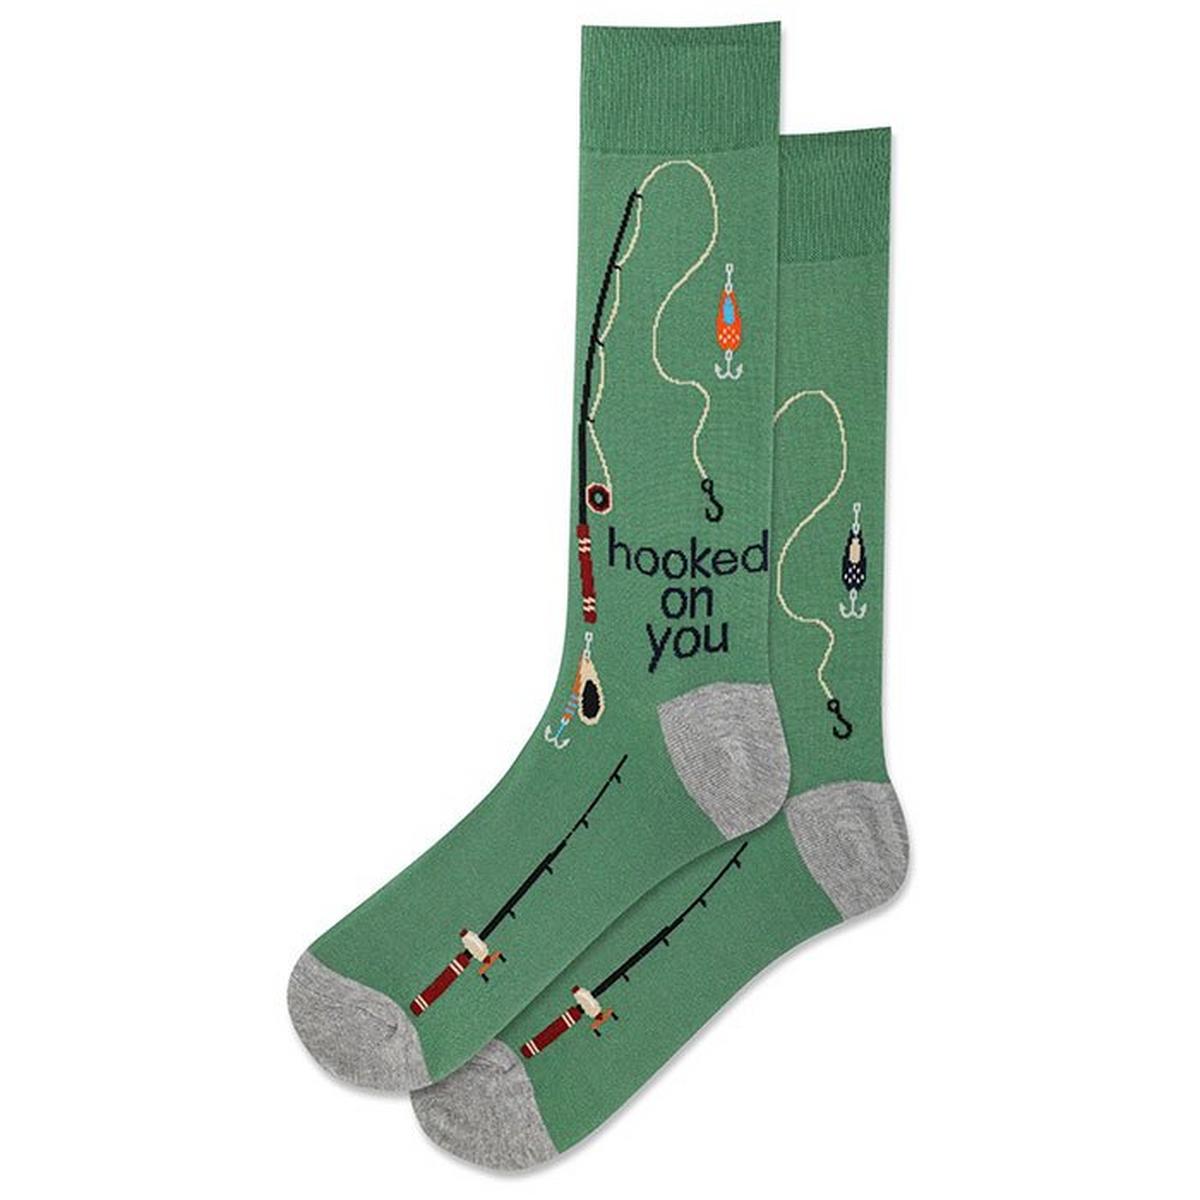 Chaussettes mi-mollet Hooked On You pour hommes